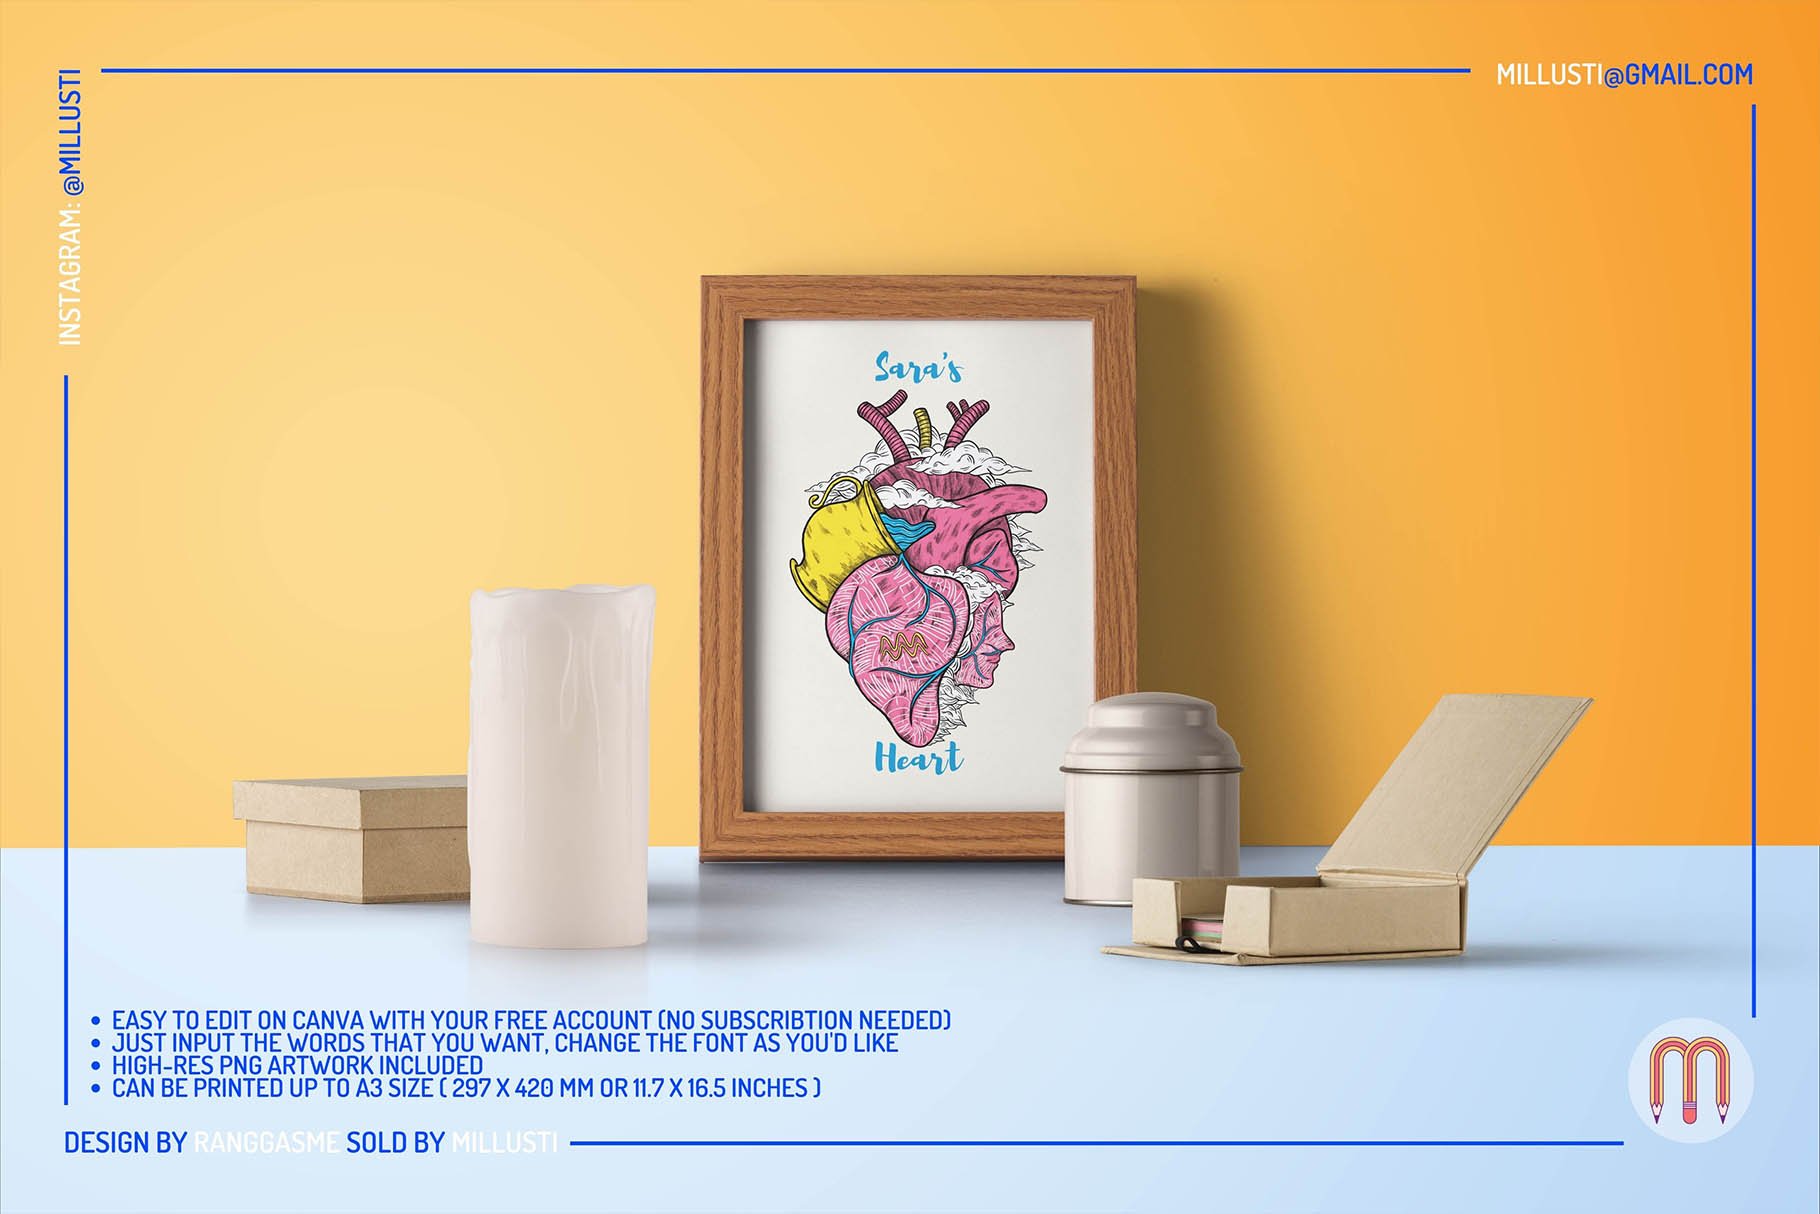 Classic poster with a wooden frame and high quality heart graphic.